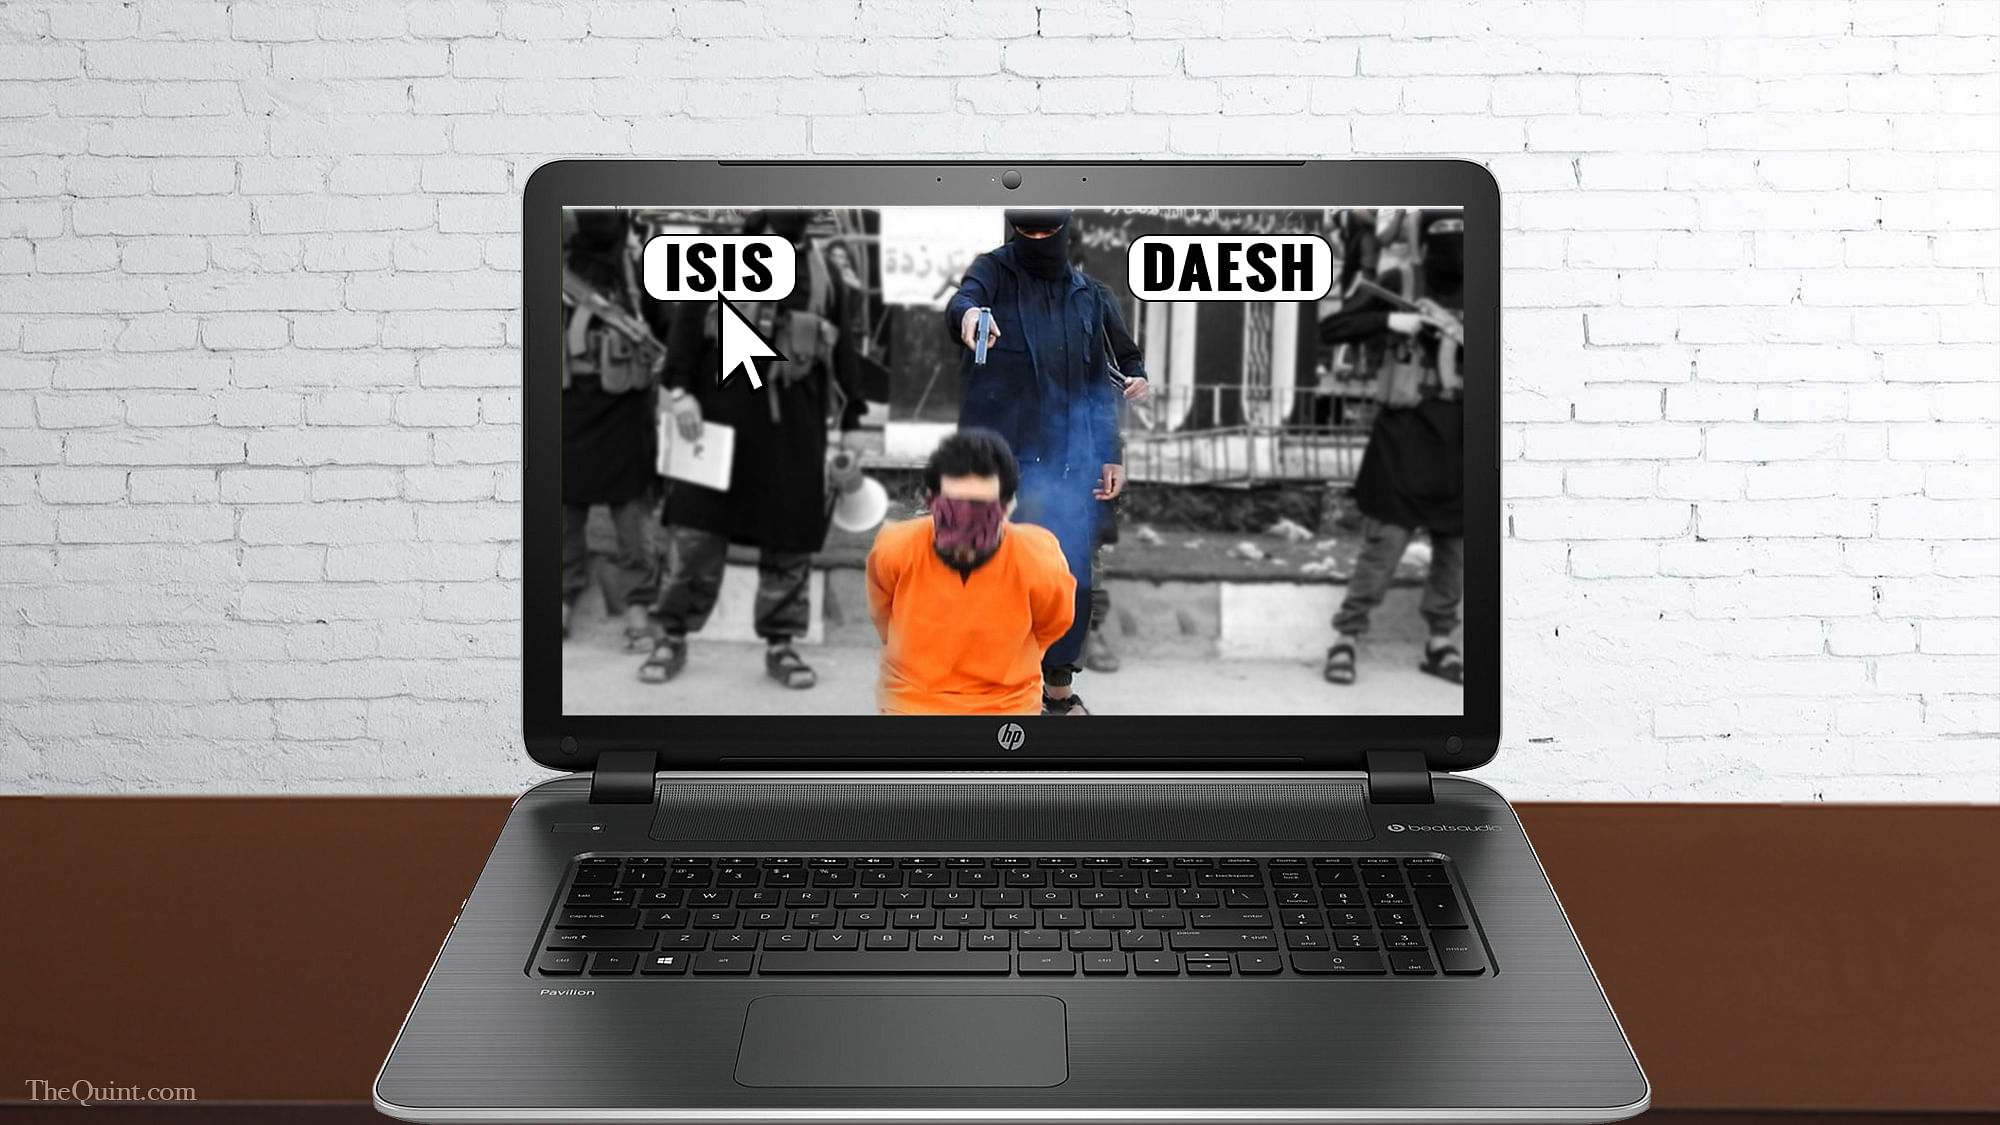 ISIS gets clicks, and the internet loves clicks. 